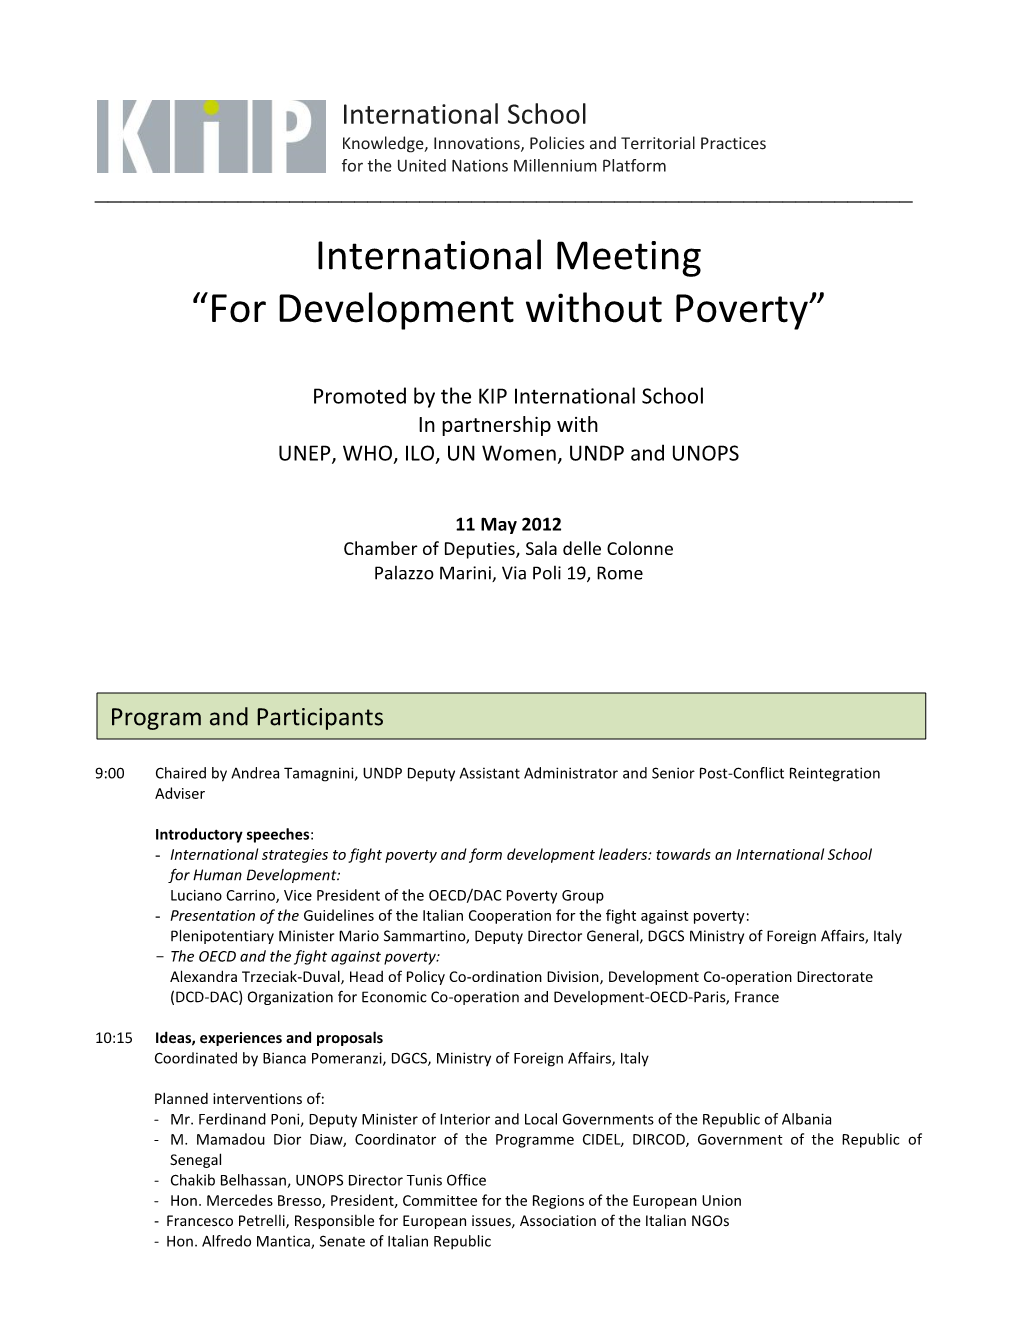 For Development Without Poverty”